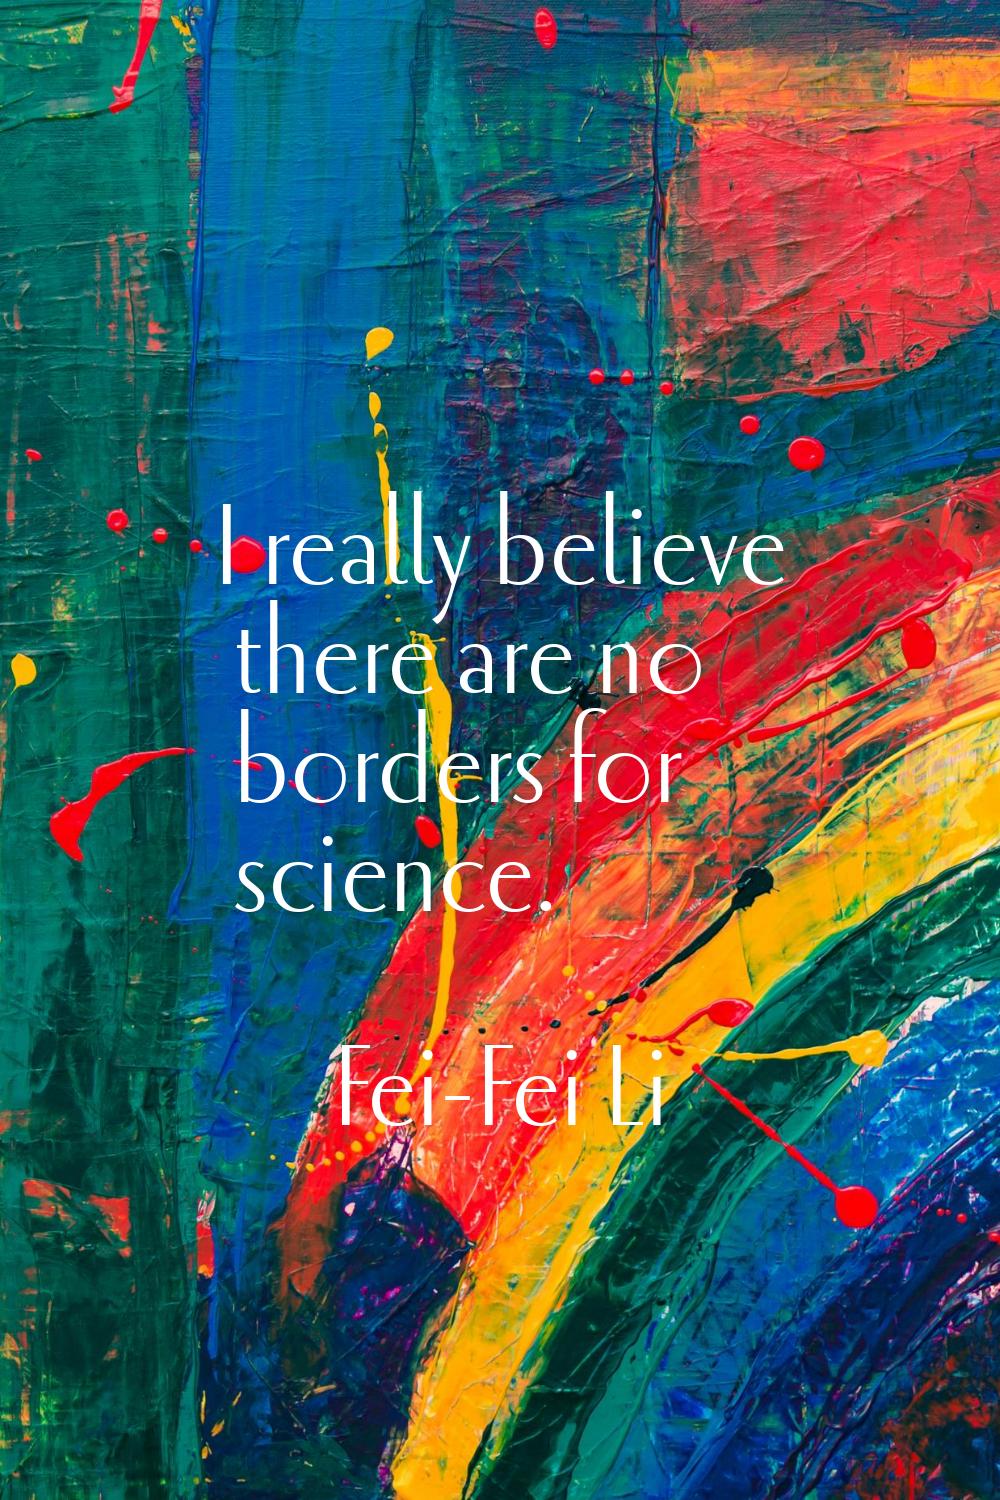 I really believe there are no borders for science.